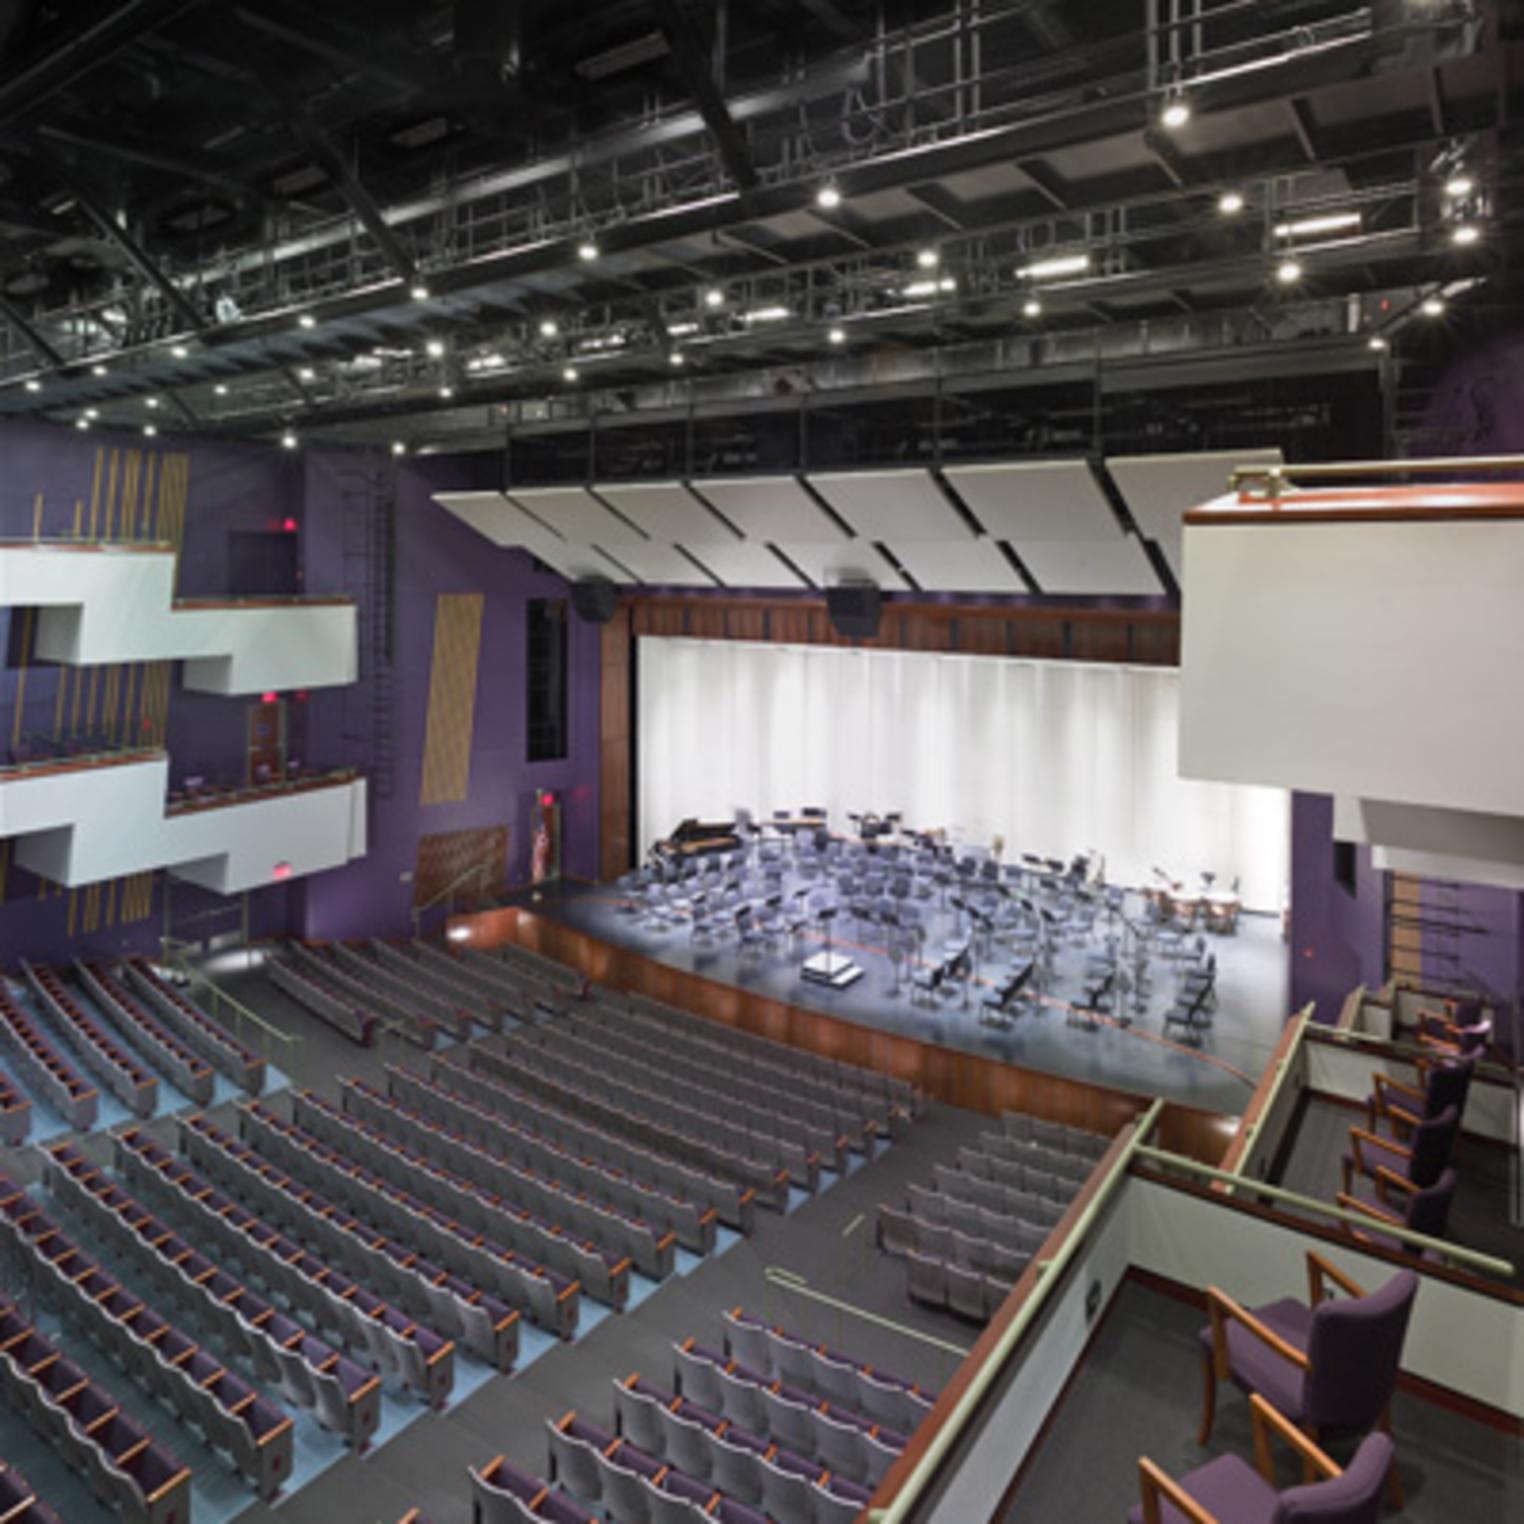 H. Ric Luhrs Performing Arts Center